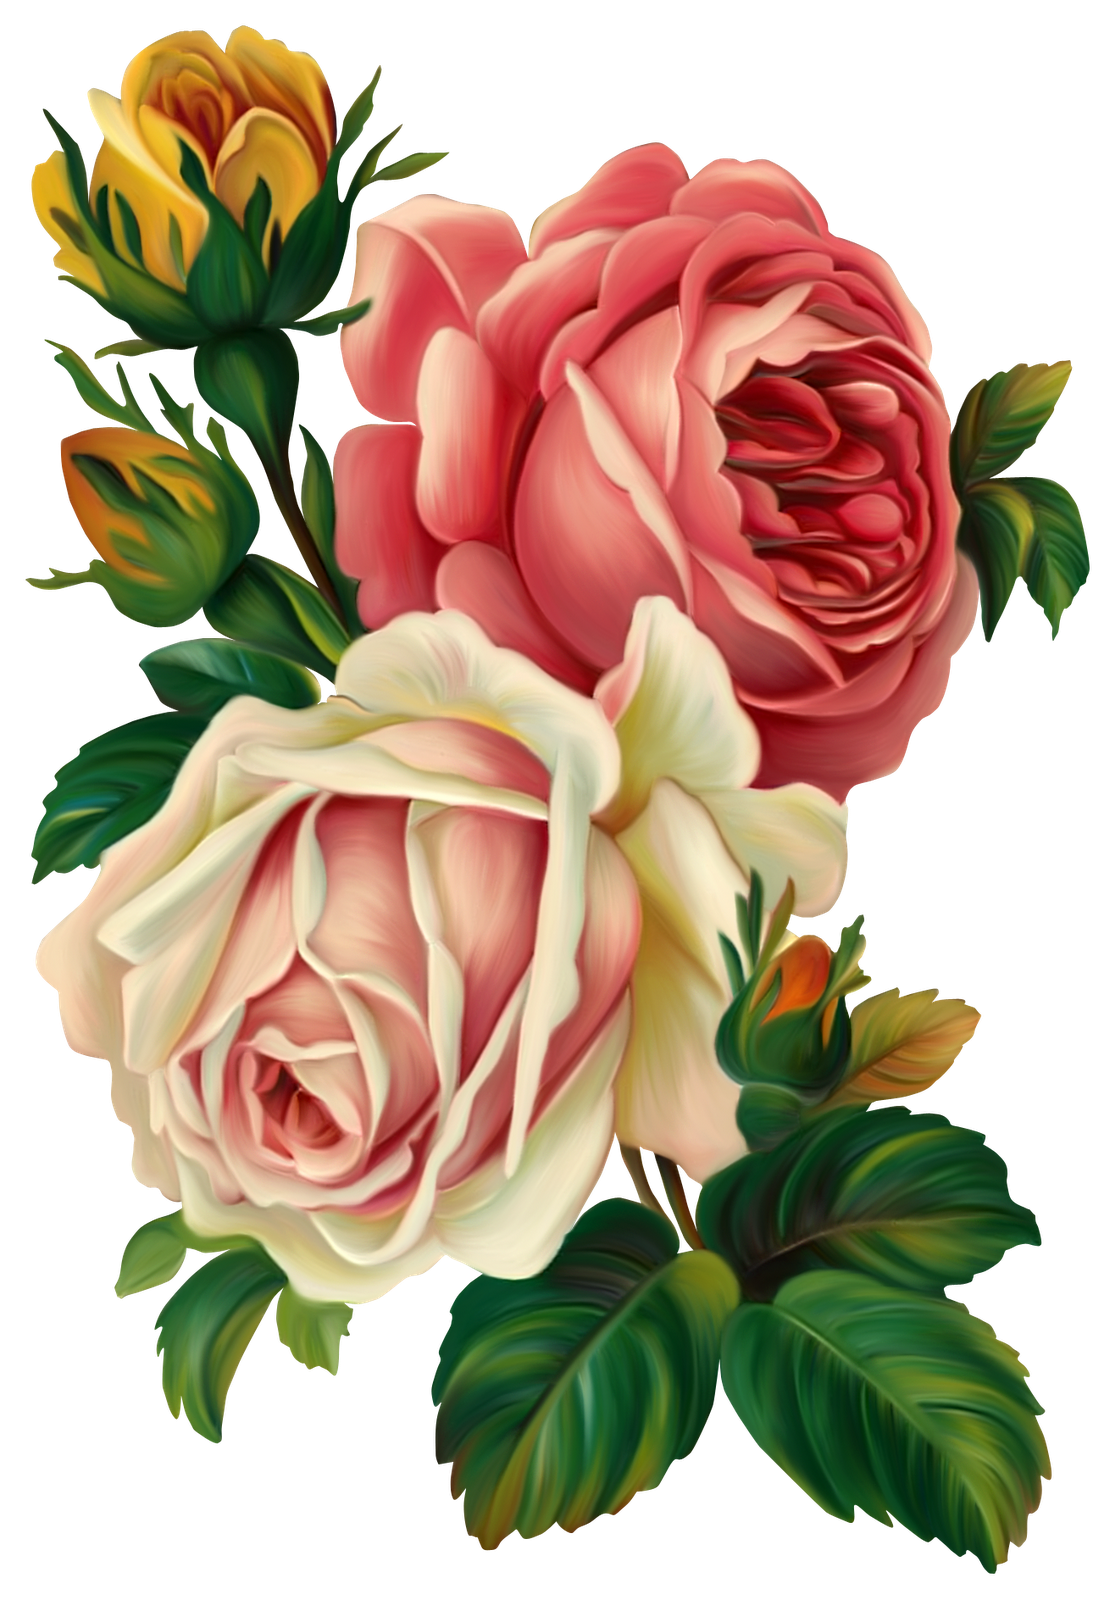 Old fashioned rose clipart 20 free Cliparts | Download ...